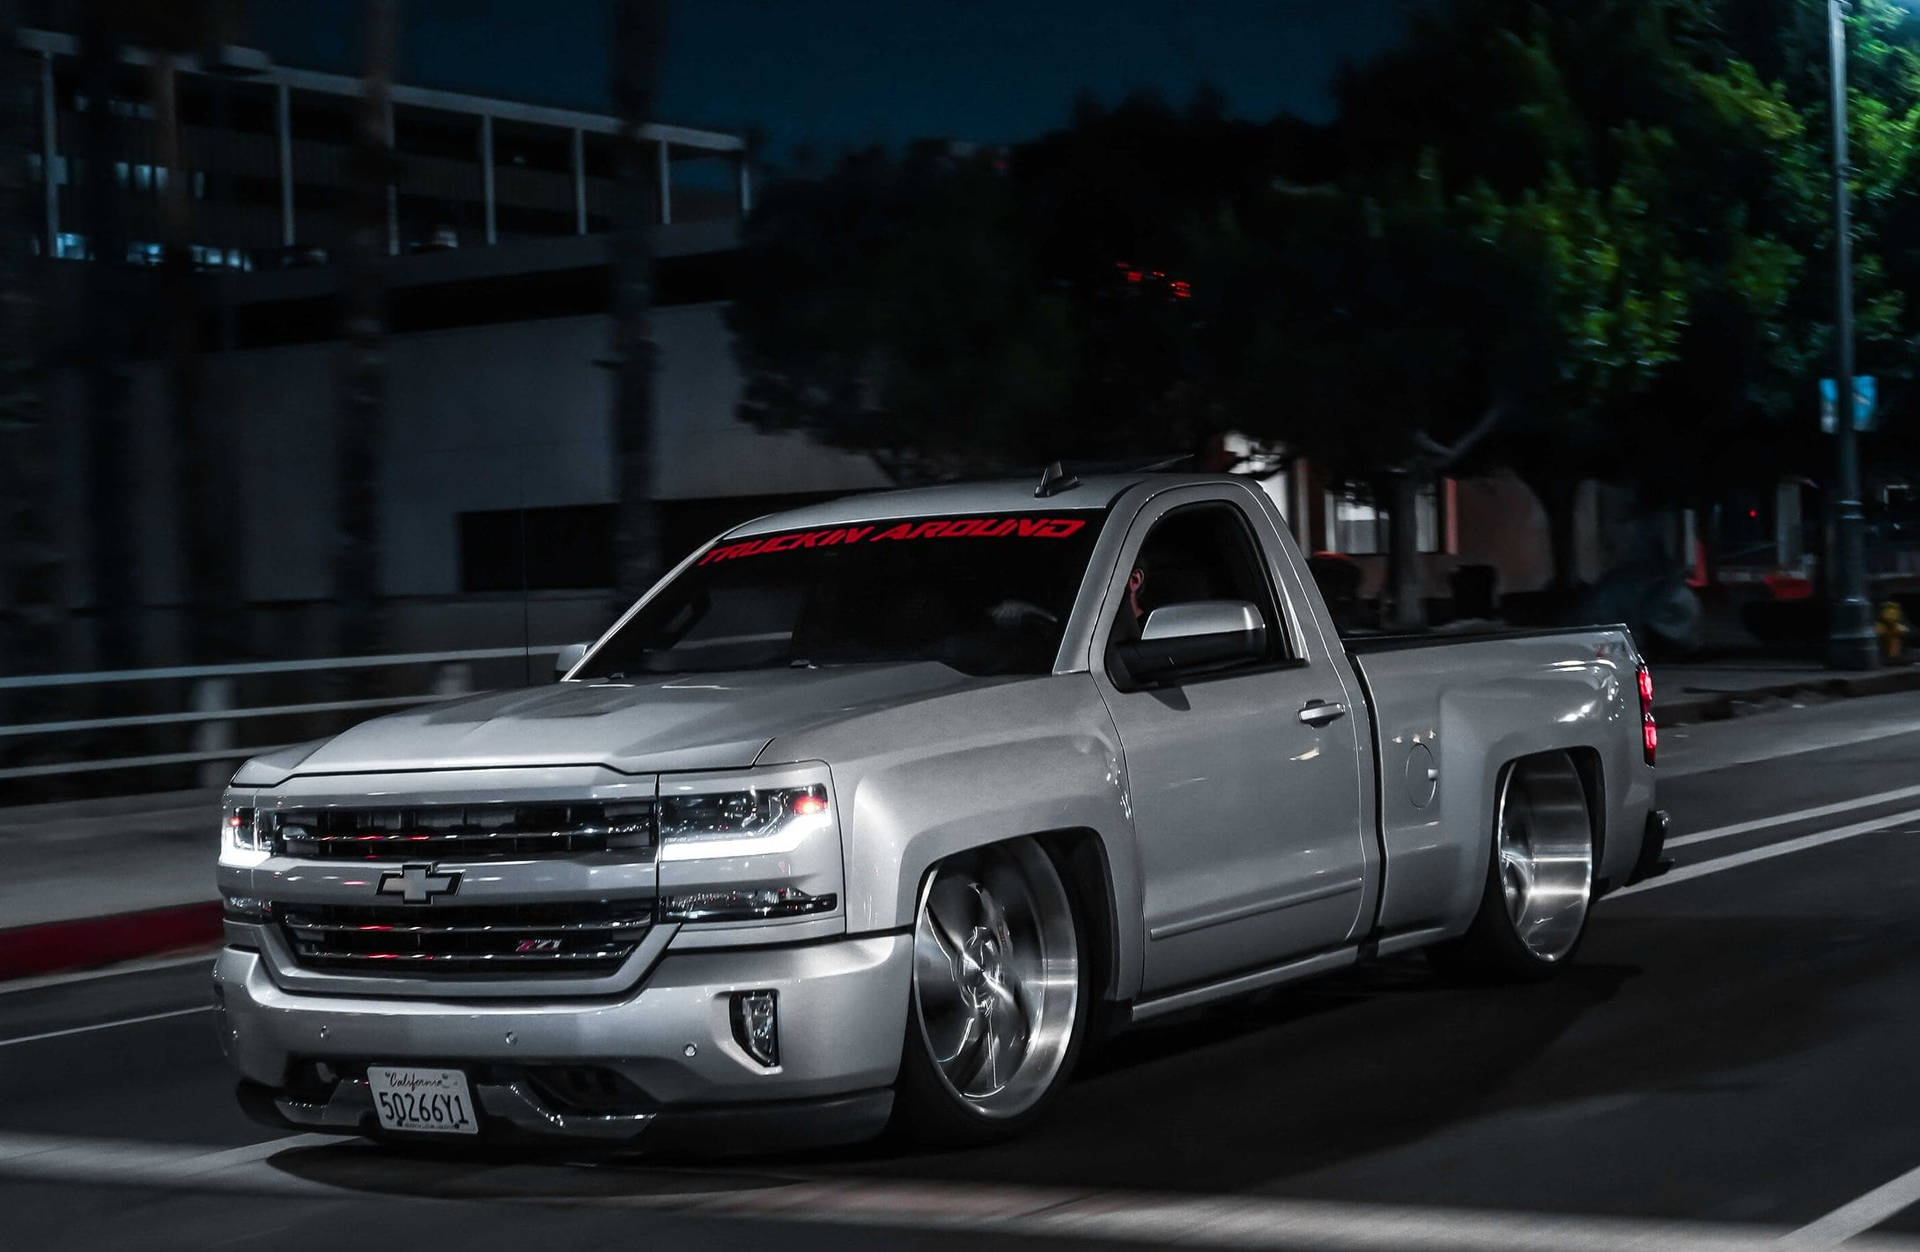 Dropped Truck At Night Wallpaper